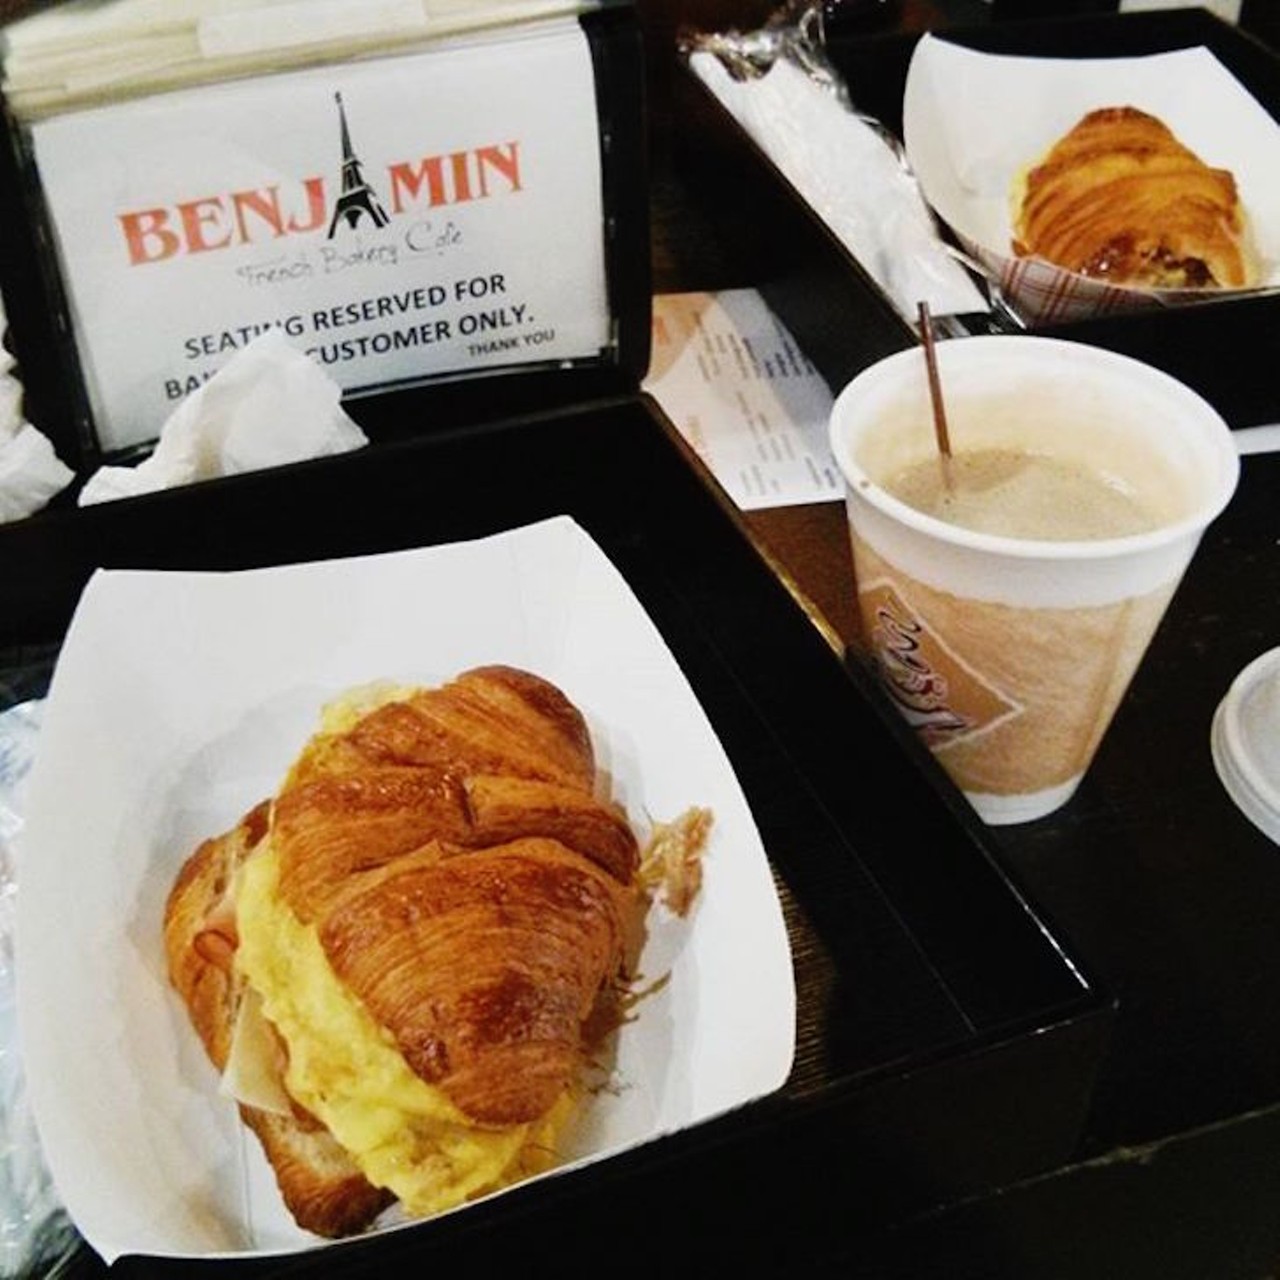 Benjamin French Bakery and Cafe
716 E. Washington St., 407-797-2253
If you&#146;re looking for a taste of France in Florida, Benjamin&#146;s has got you covered. Enjoy a flaky croissant or a colorful macaron while you sip your cappuccino and stare smugly in a classic French style at passers-by who dare to walk past your bistro table.
Photo via bagofarms Instagram